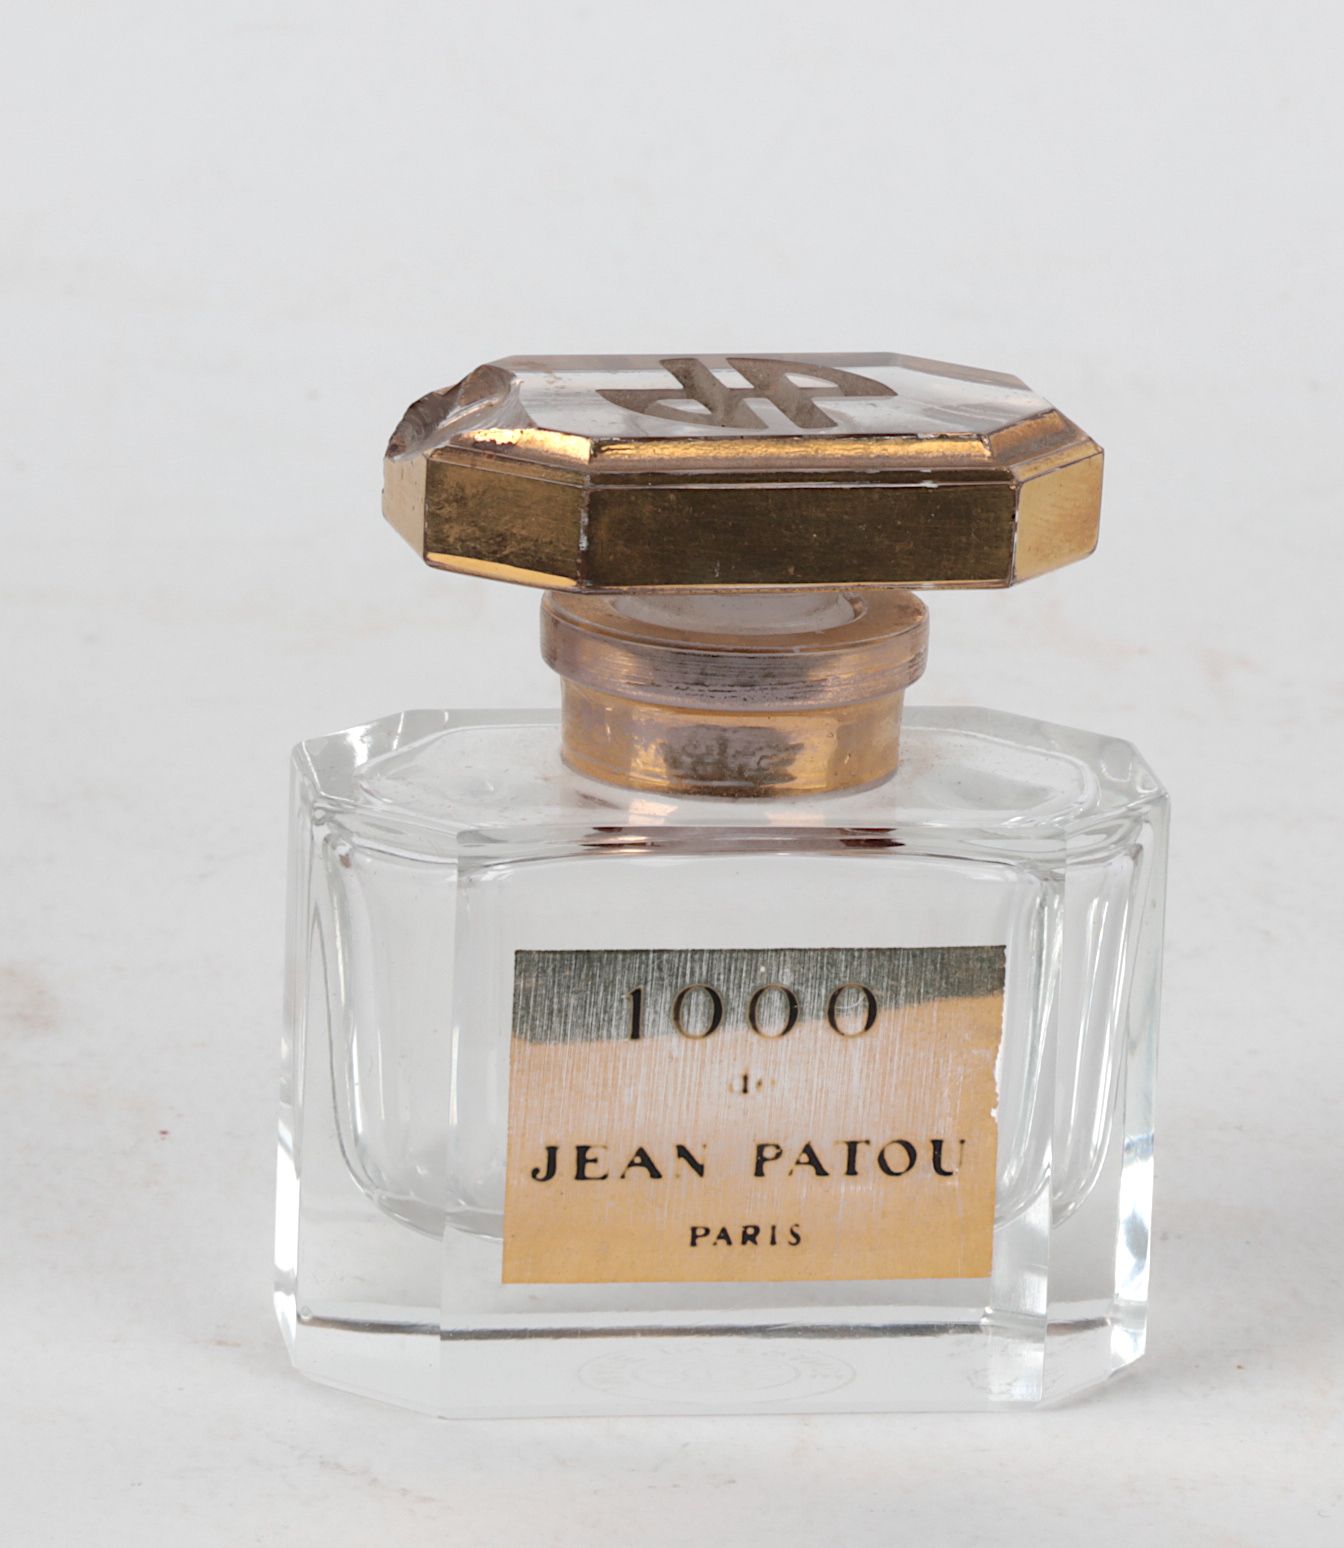 Null PATOU Jean, bottle "1000", crystal (chip on the cap). 7X6X3, brown box.